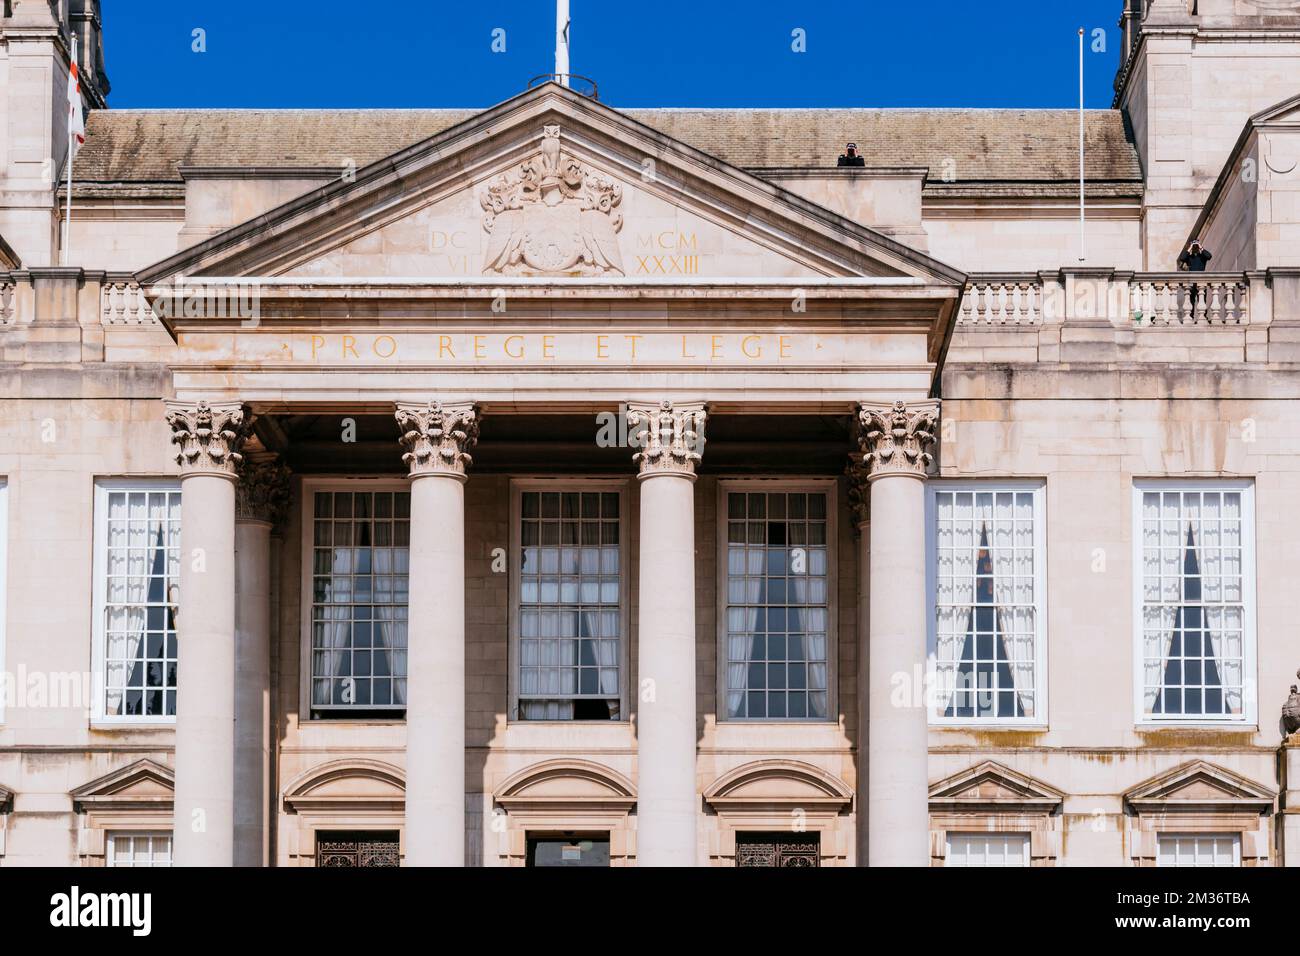 Detail facade. Leeds Civic Hall is a municipal building located in the civic quarter of Leeds. It replaced Leeds Town Hall as the administrative centr Stock Photo